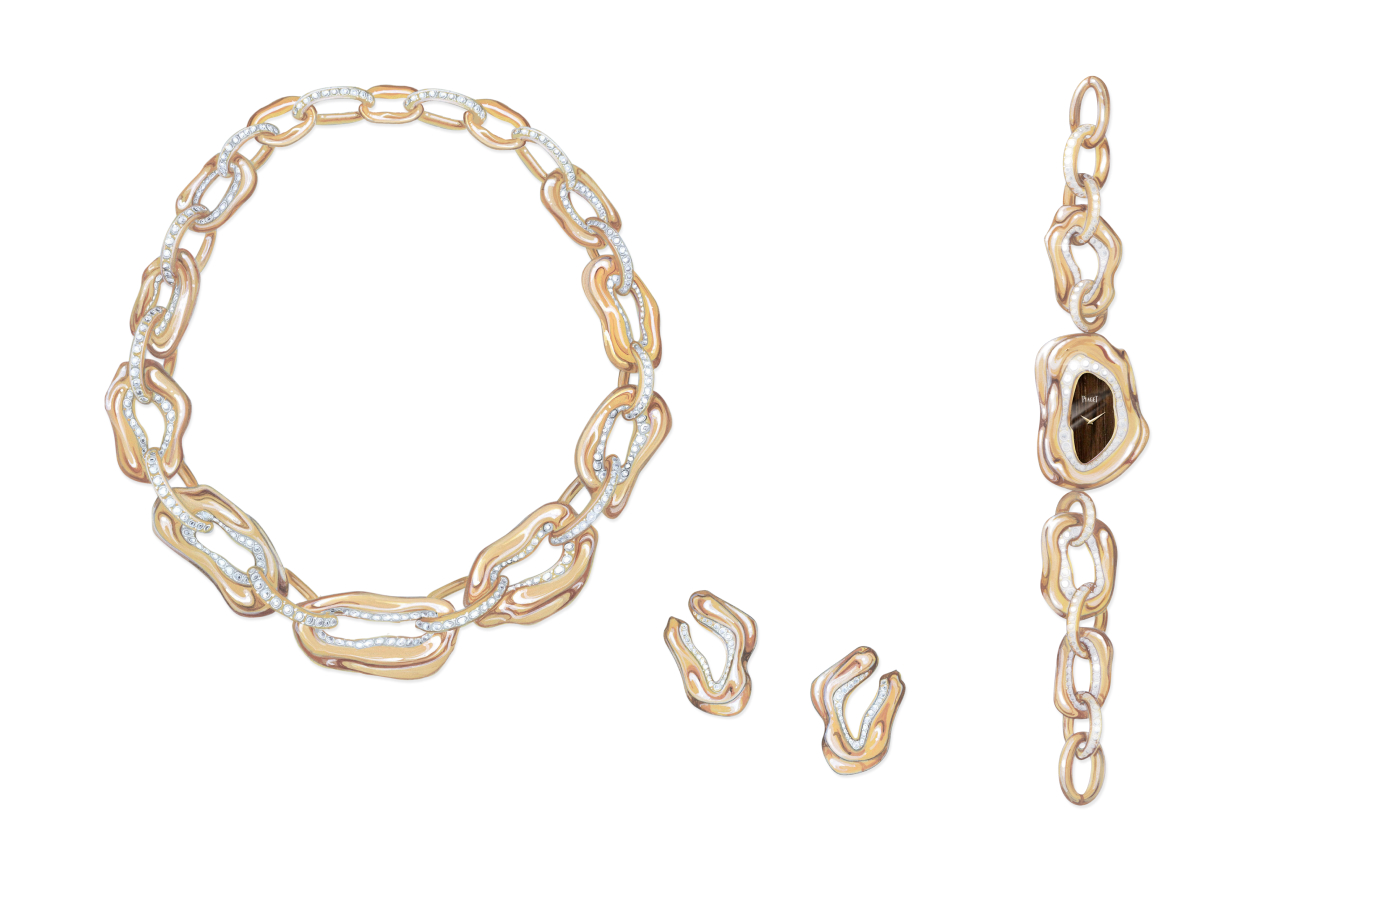 Piaget Metaphoria Essentia suite, including a necklace, a pair of earrings and a watch with organic-shaped chain links in 18k yellow gold, diamonds and tiger’s eye